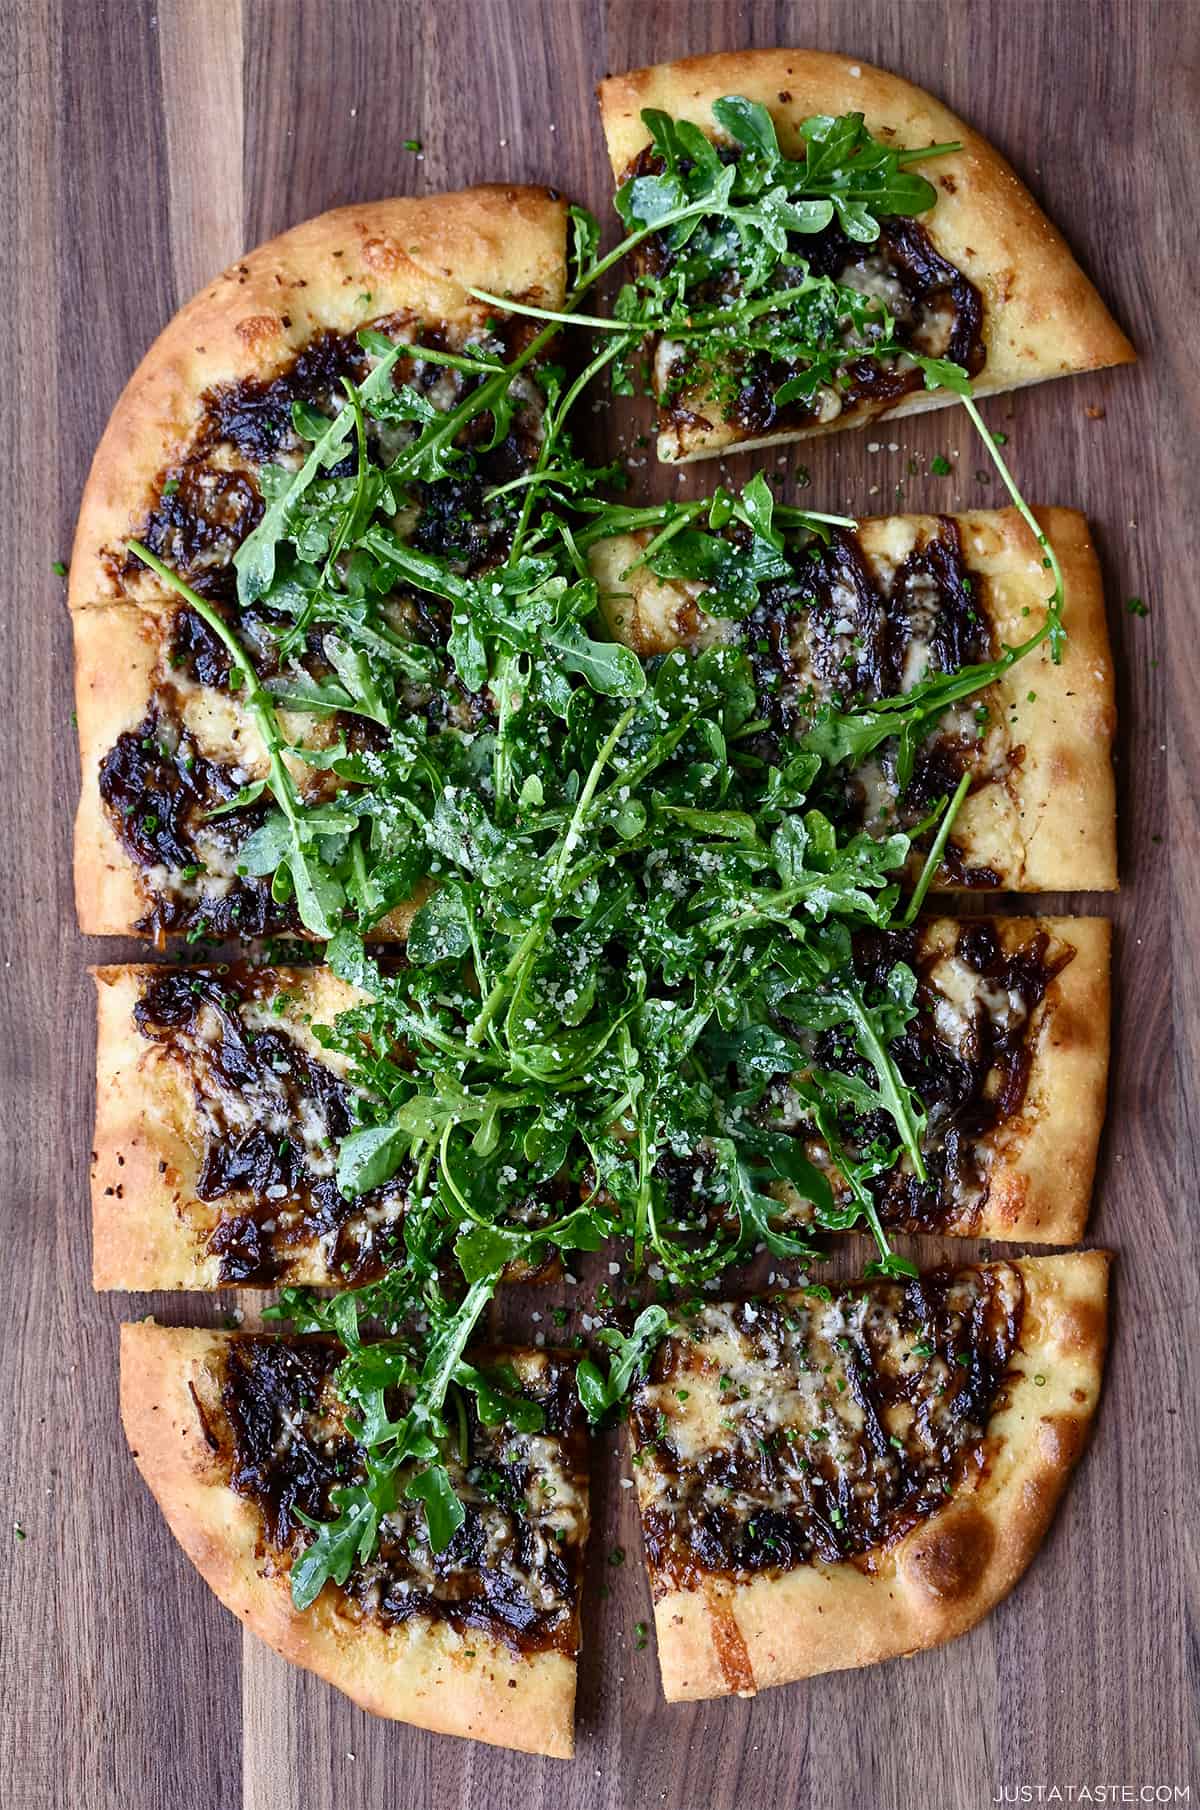 Pizza with caramelized onions, melted gruyere cheese and fresh arugula sliced into rectangles.